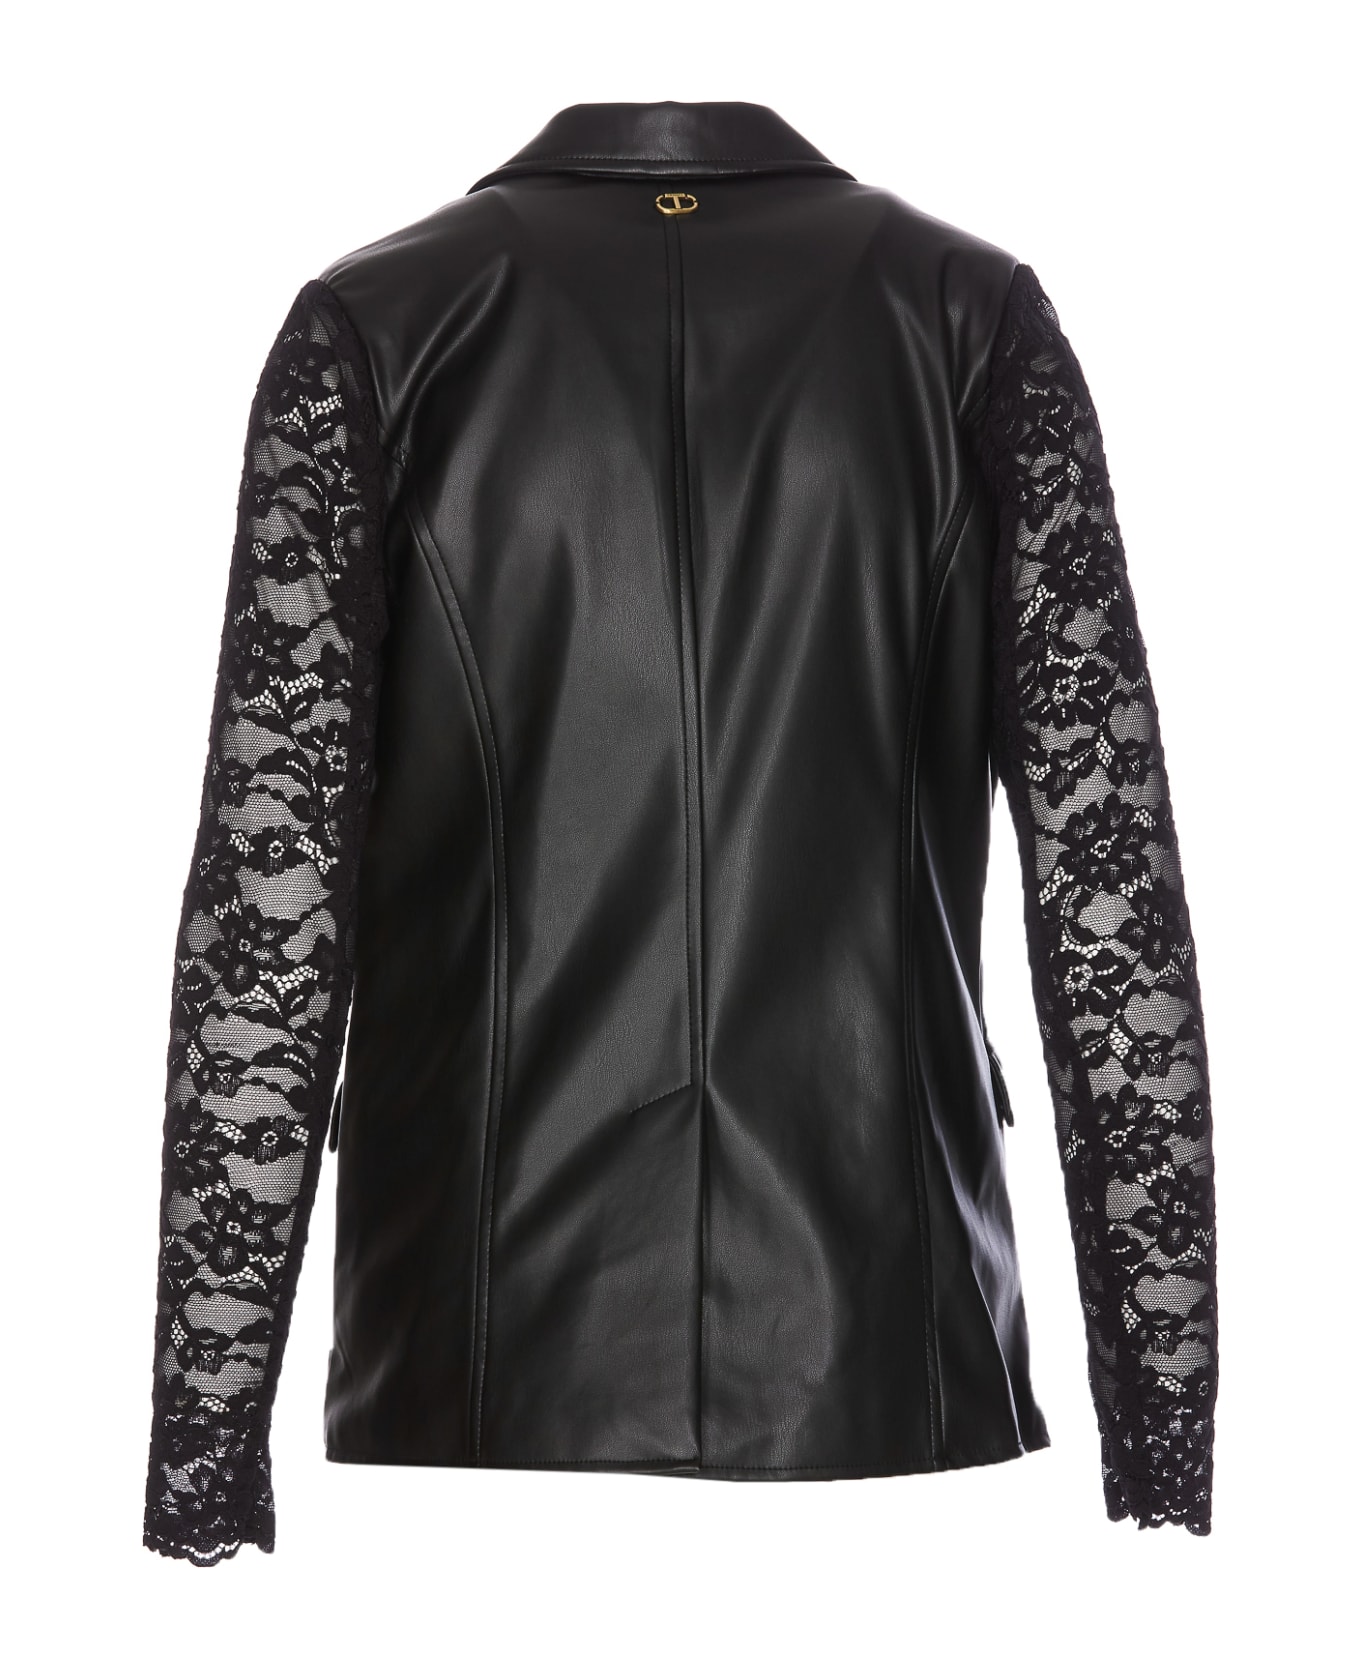 TwinSet Leather Effect Blazer With Lace - Nero